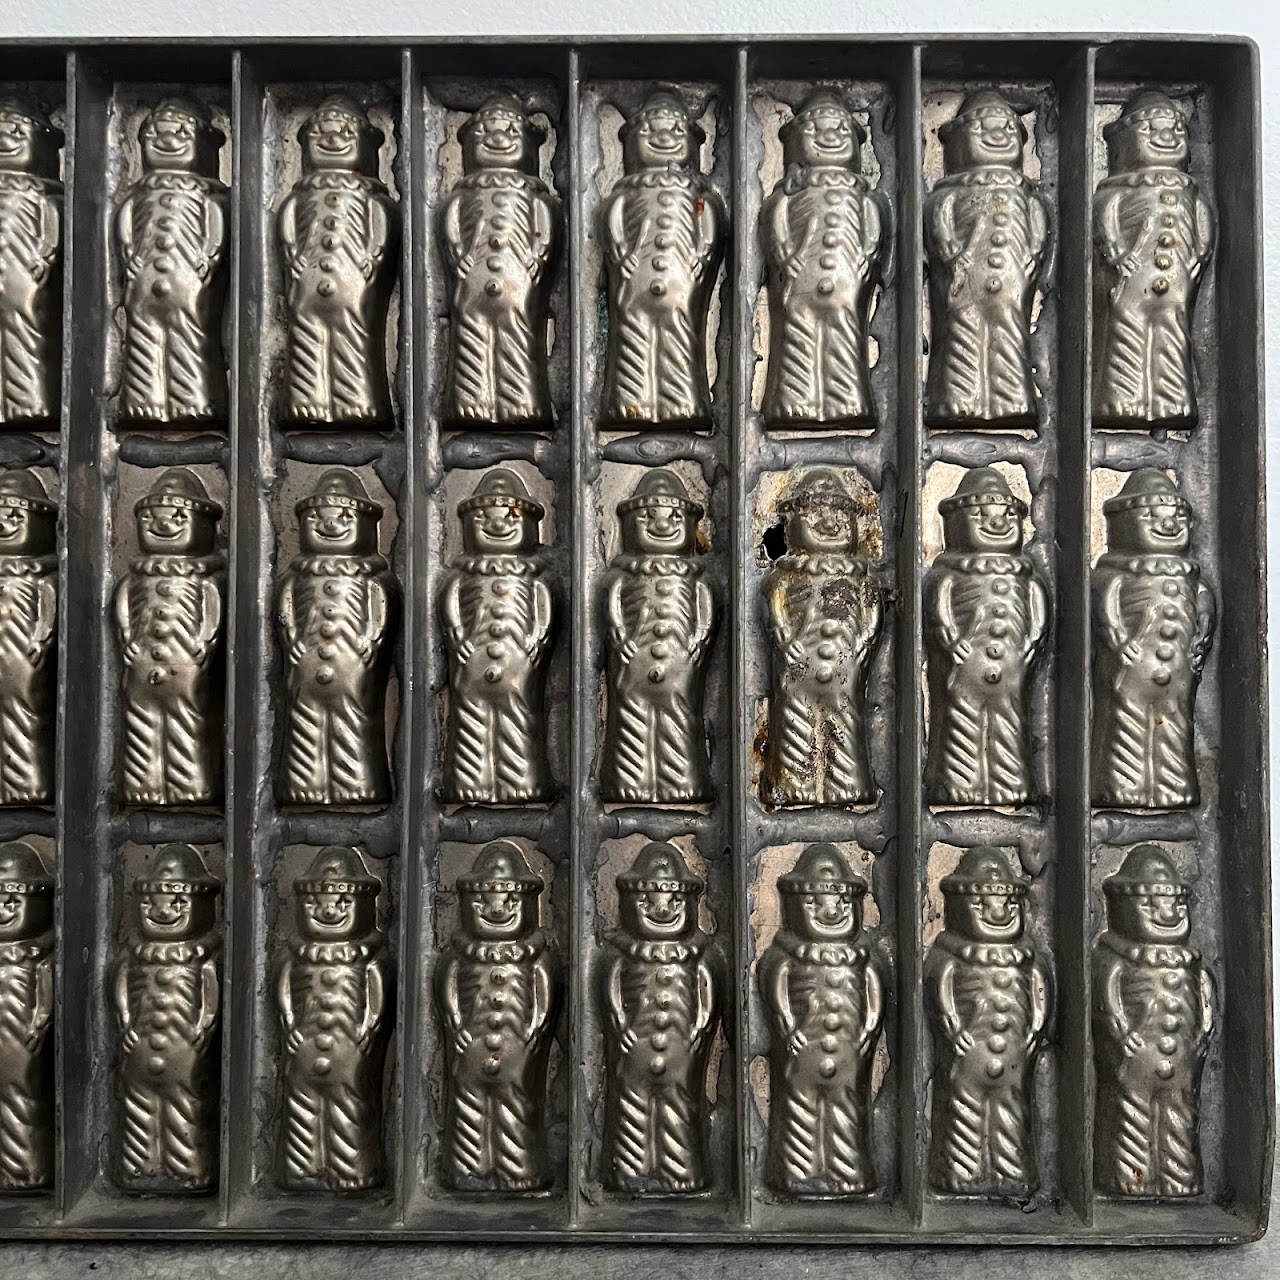 Antique Industrial Circus Clown Candy Mold